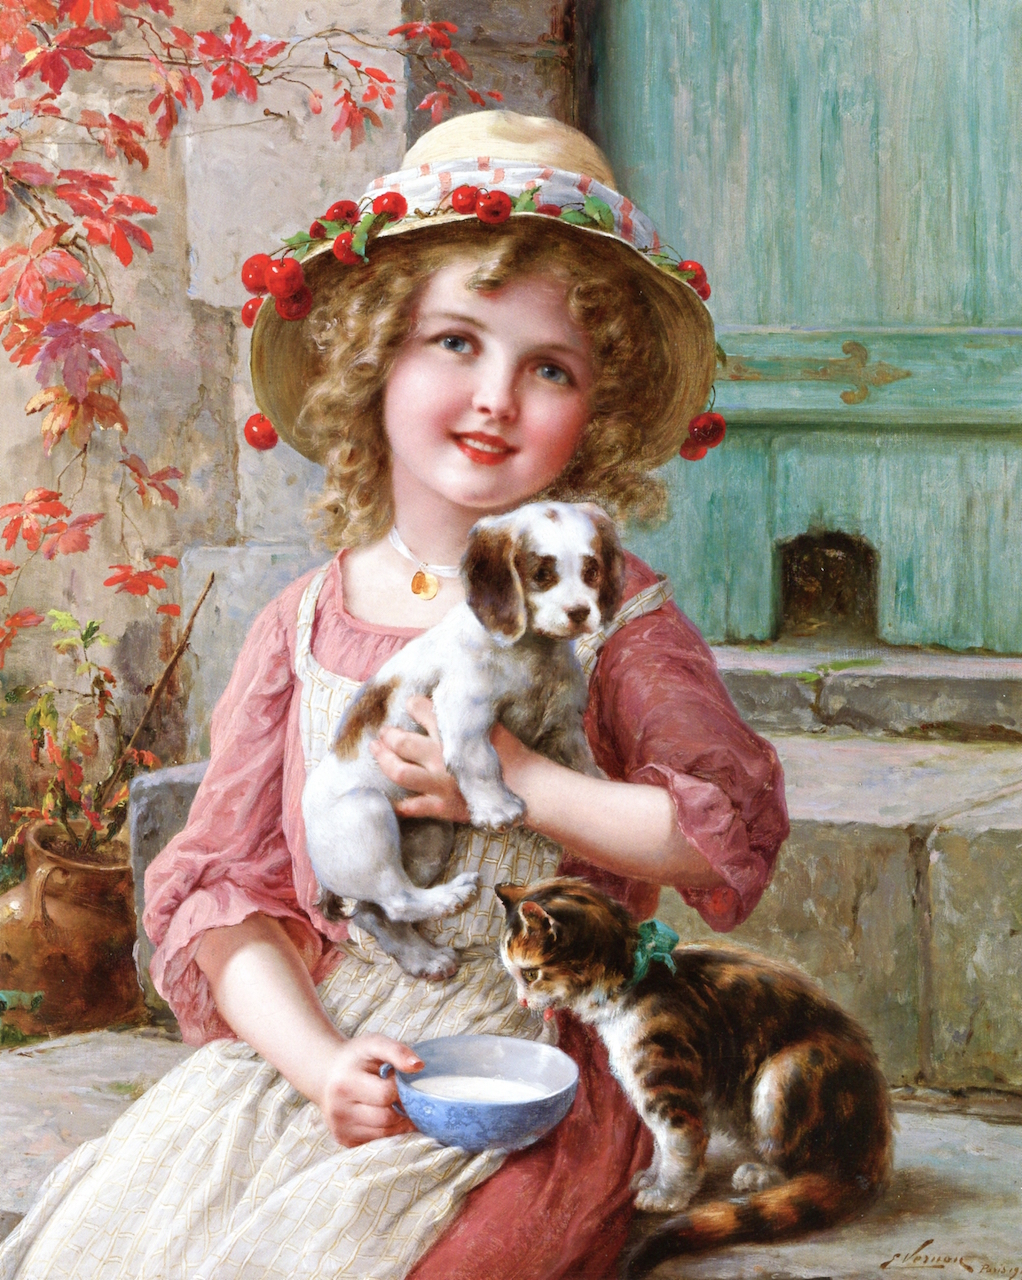 New Friends by Emile Vernon, 1917